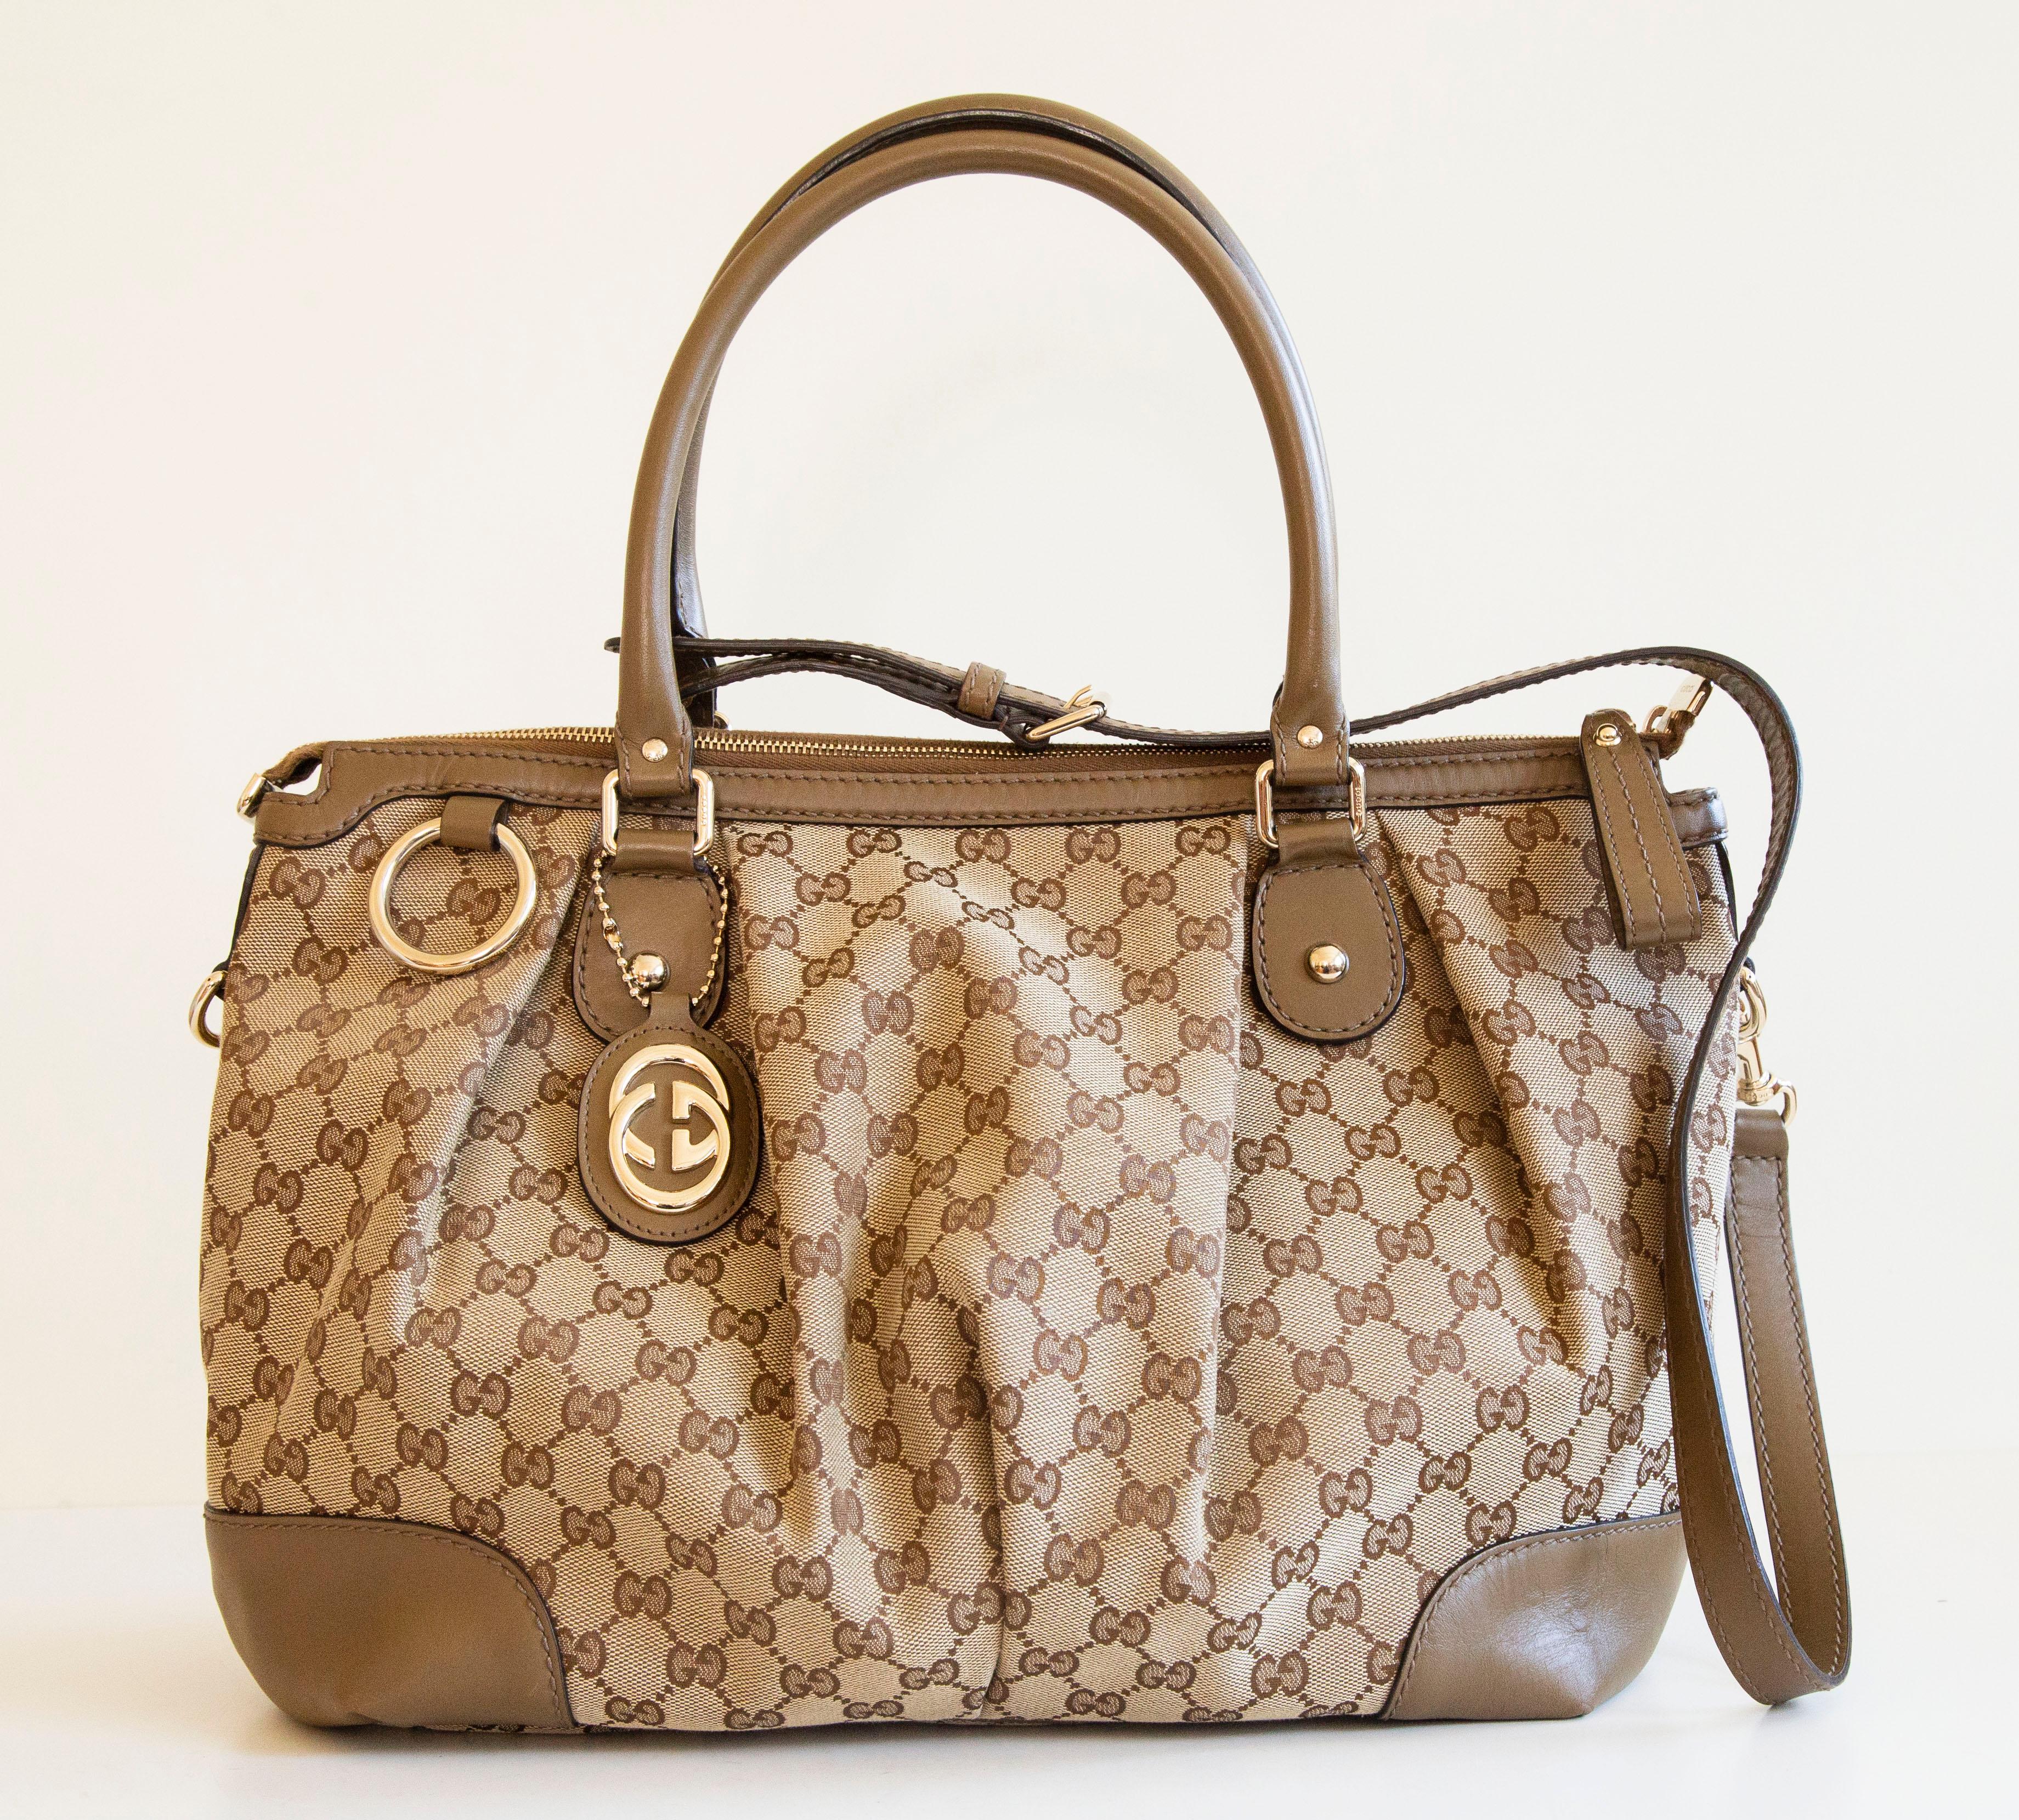 An authentic Gucci Sukey two-way bag. The bag can be both worn as a top handle bag or as a crossbody bag, the strap is removable. The bag features a GG canvas, brownish/ochre leather trim, and gold-tone hardware. The interior is lined with beige